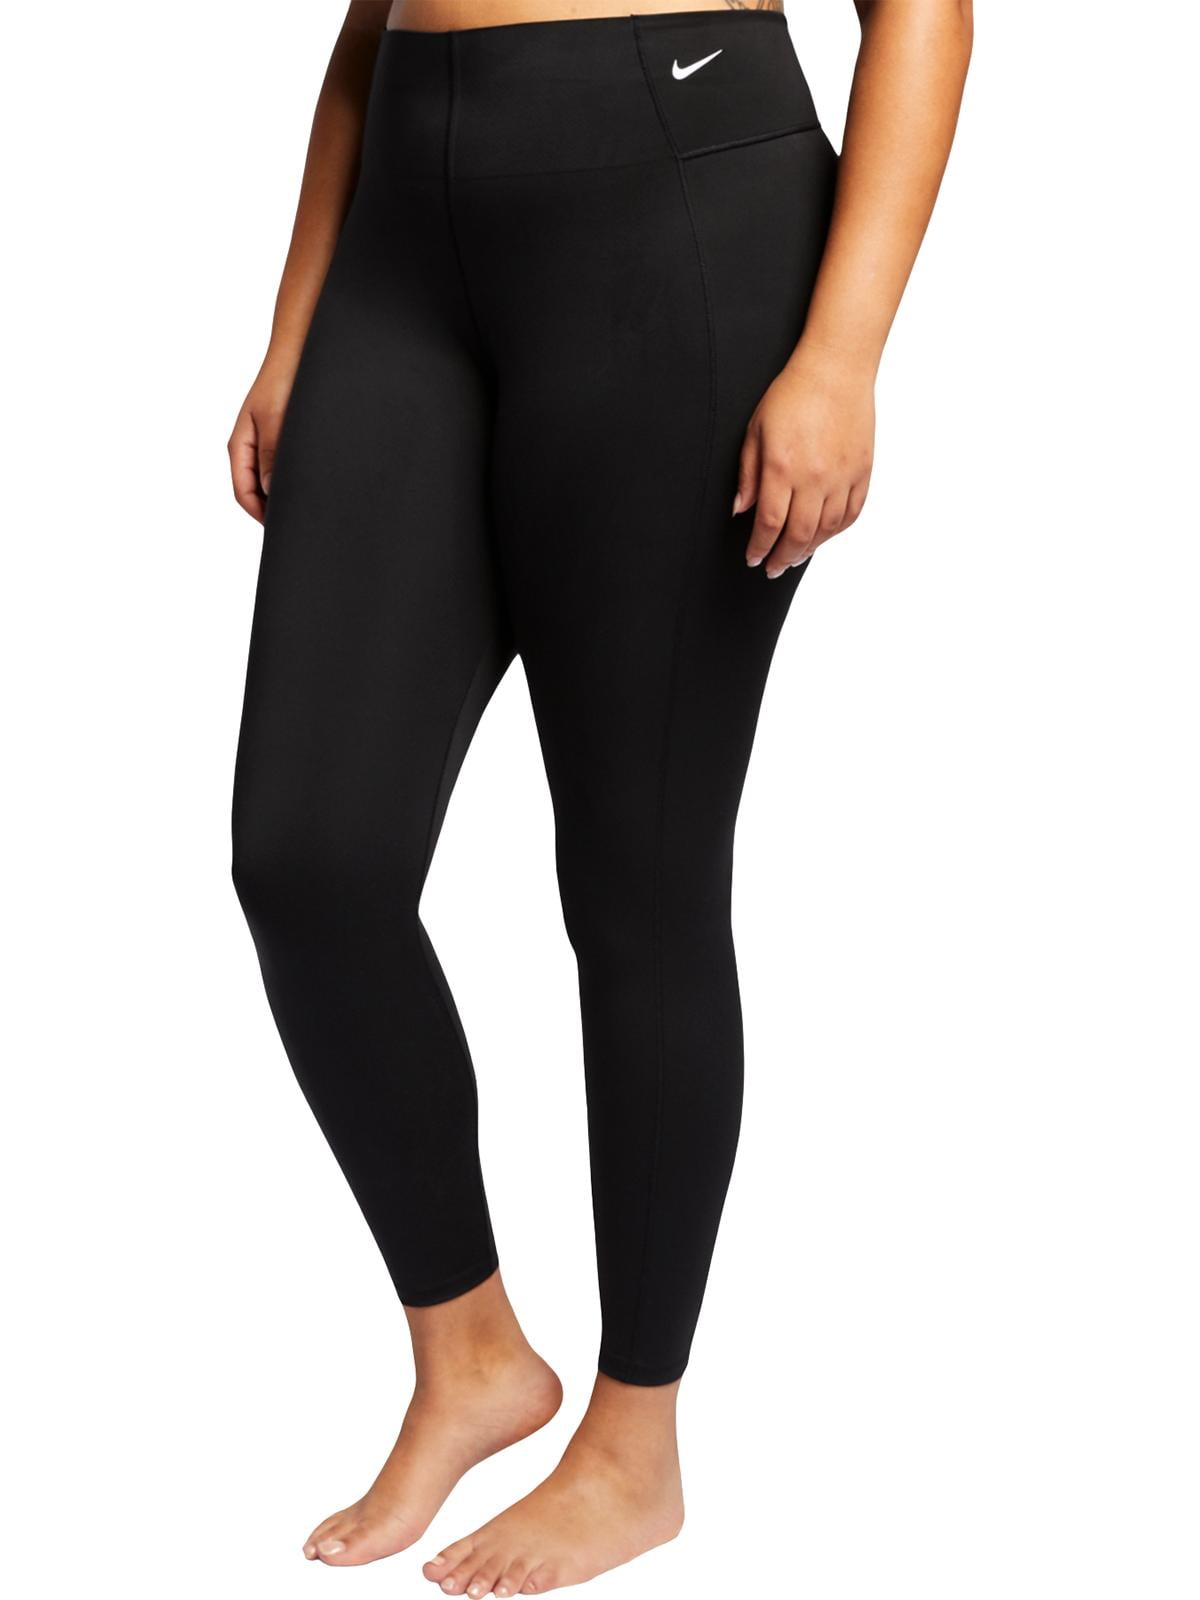 Nike Leggings For Women Elegant Dri Fit Athletic Yoga Pants With High Waist  and Ankle Grips 